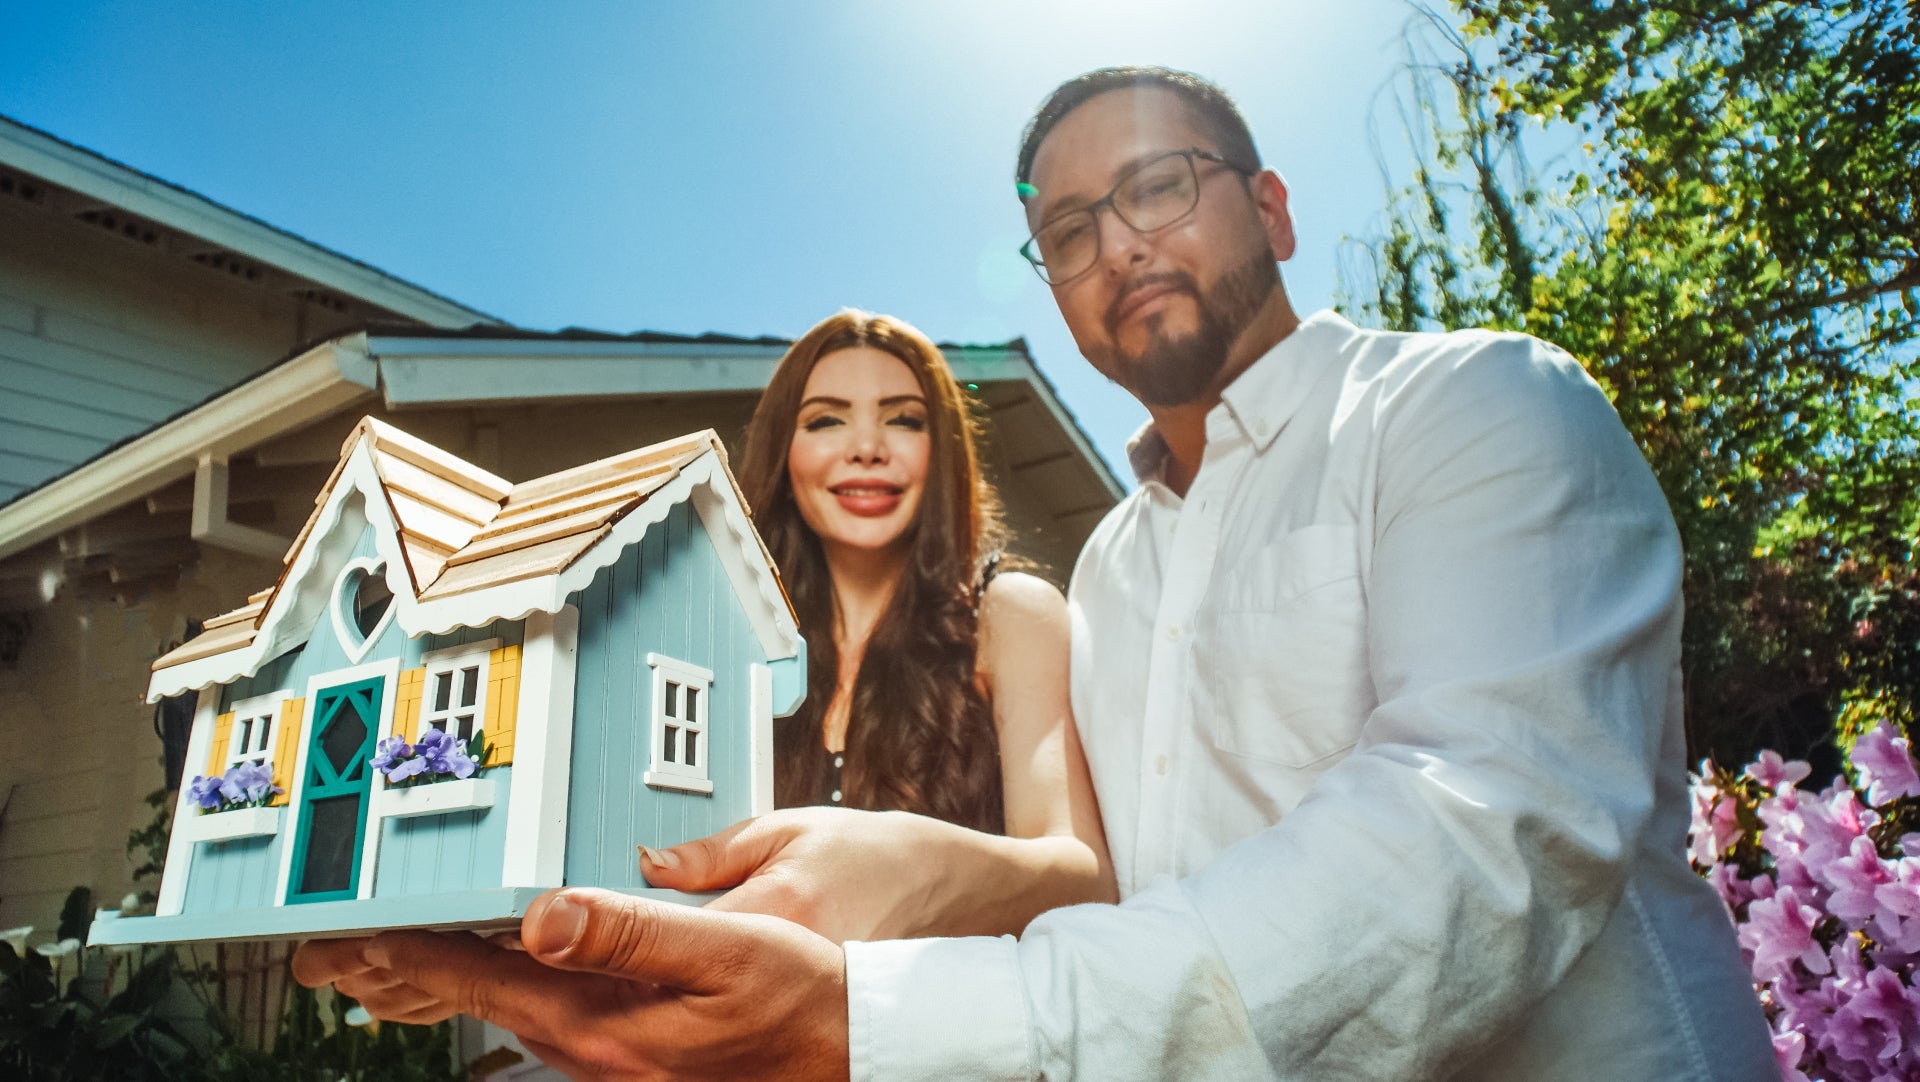 A couple sits in front of their new home, holding a model of a smaller home in front of them